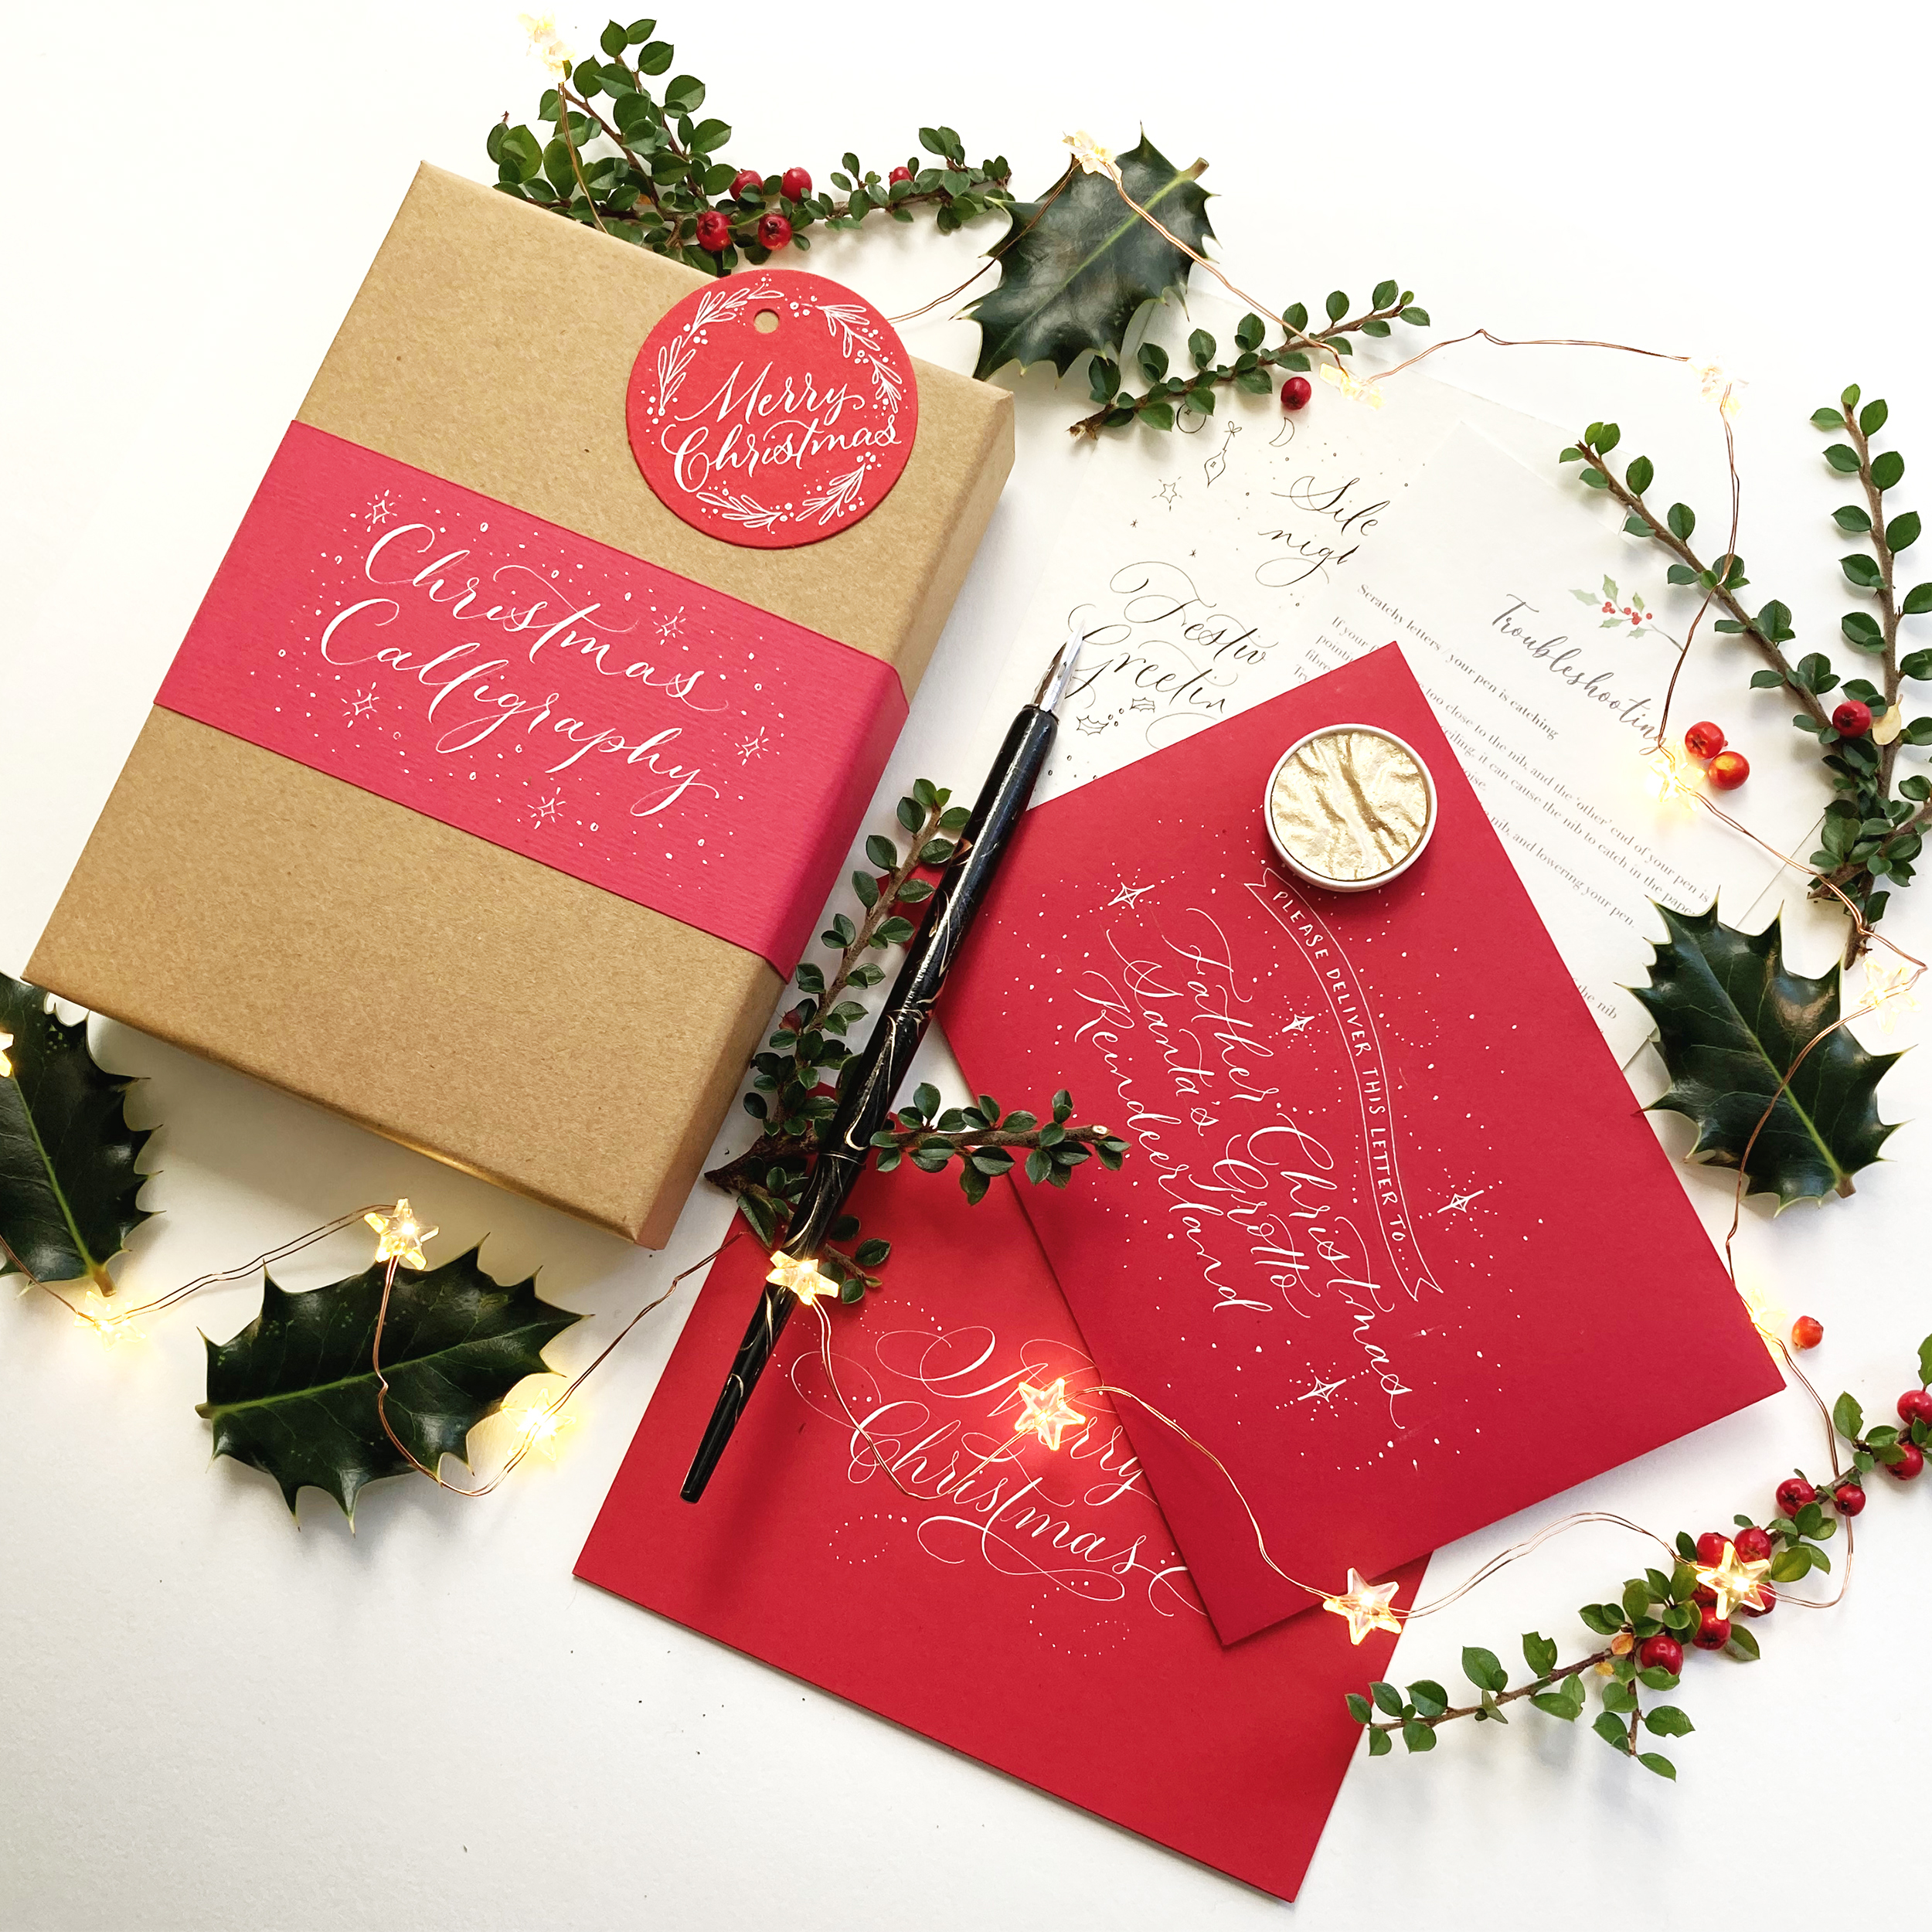 Christmas calligraphy sets for your creative fingers!